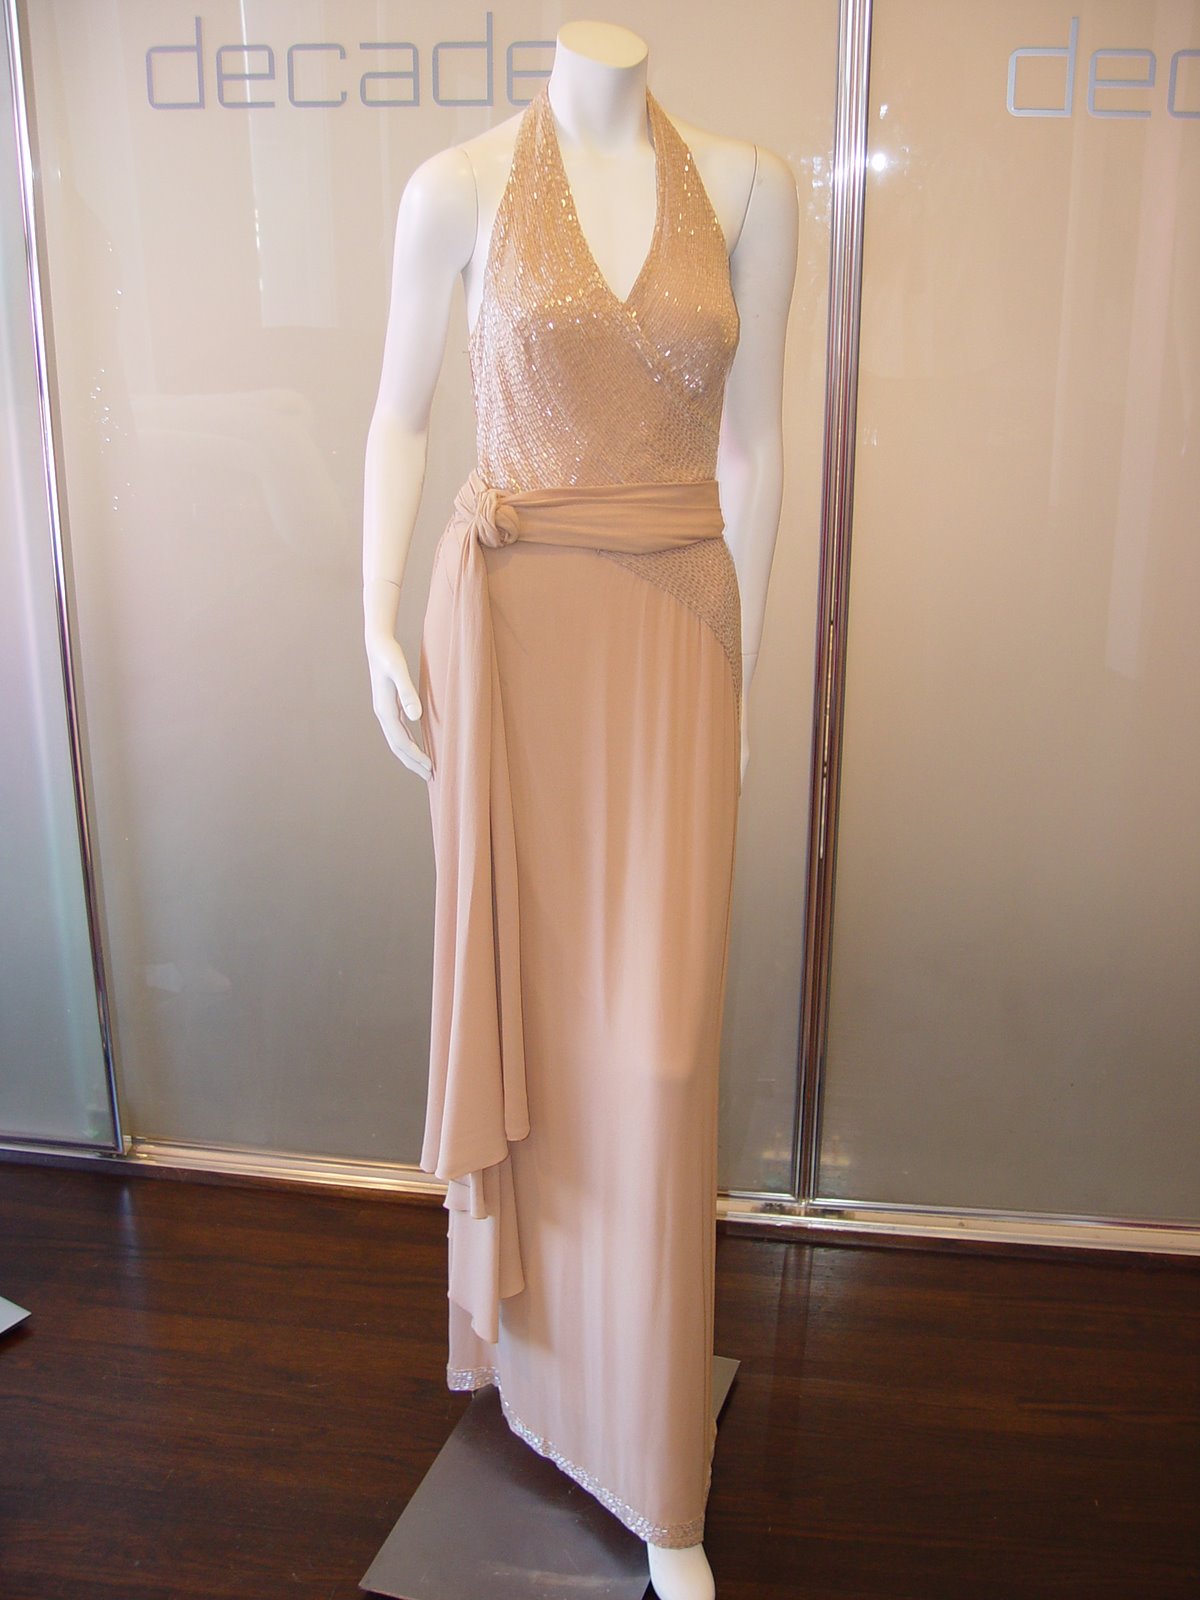 [CHLOE+70S+NUDE+CREPE+HALTER+GOWN+WITH+BUGLE+BEAD+BELTED+SWAG+AND+WRAP.JPG+(1).JPG]